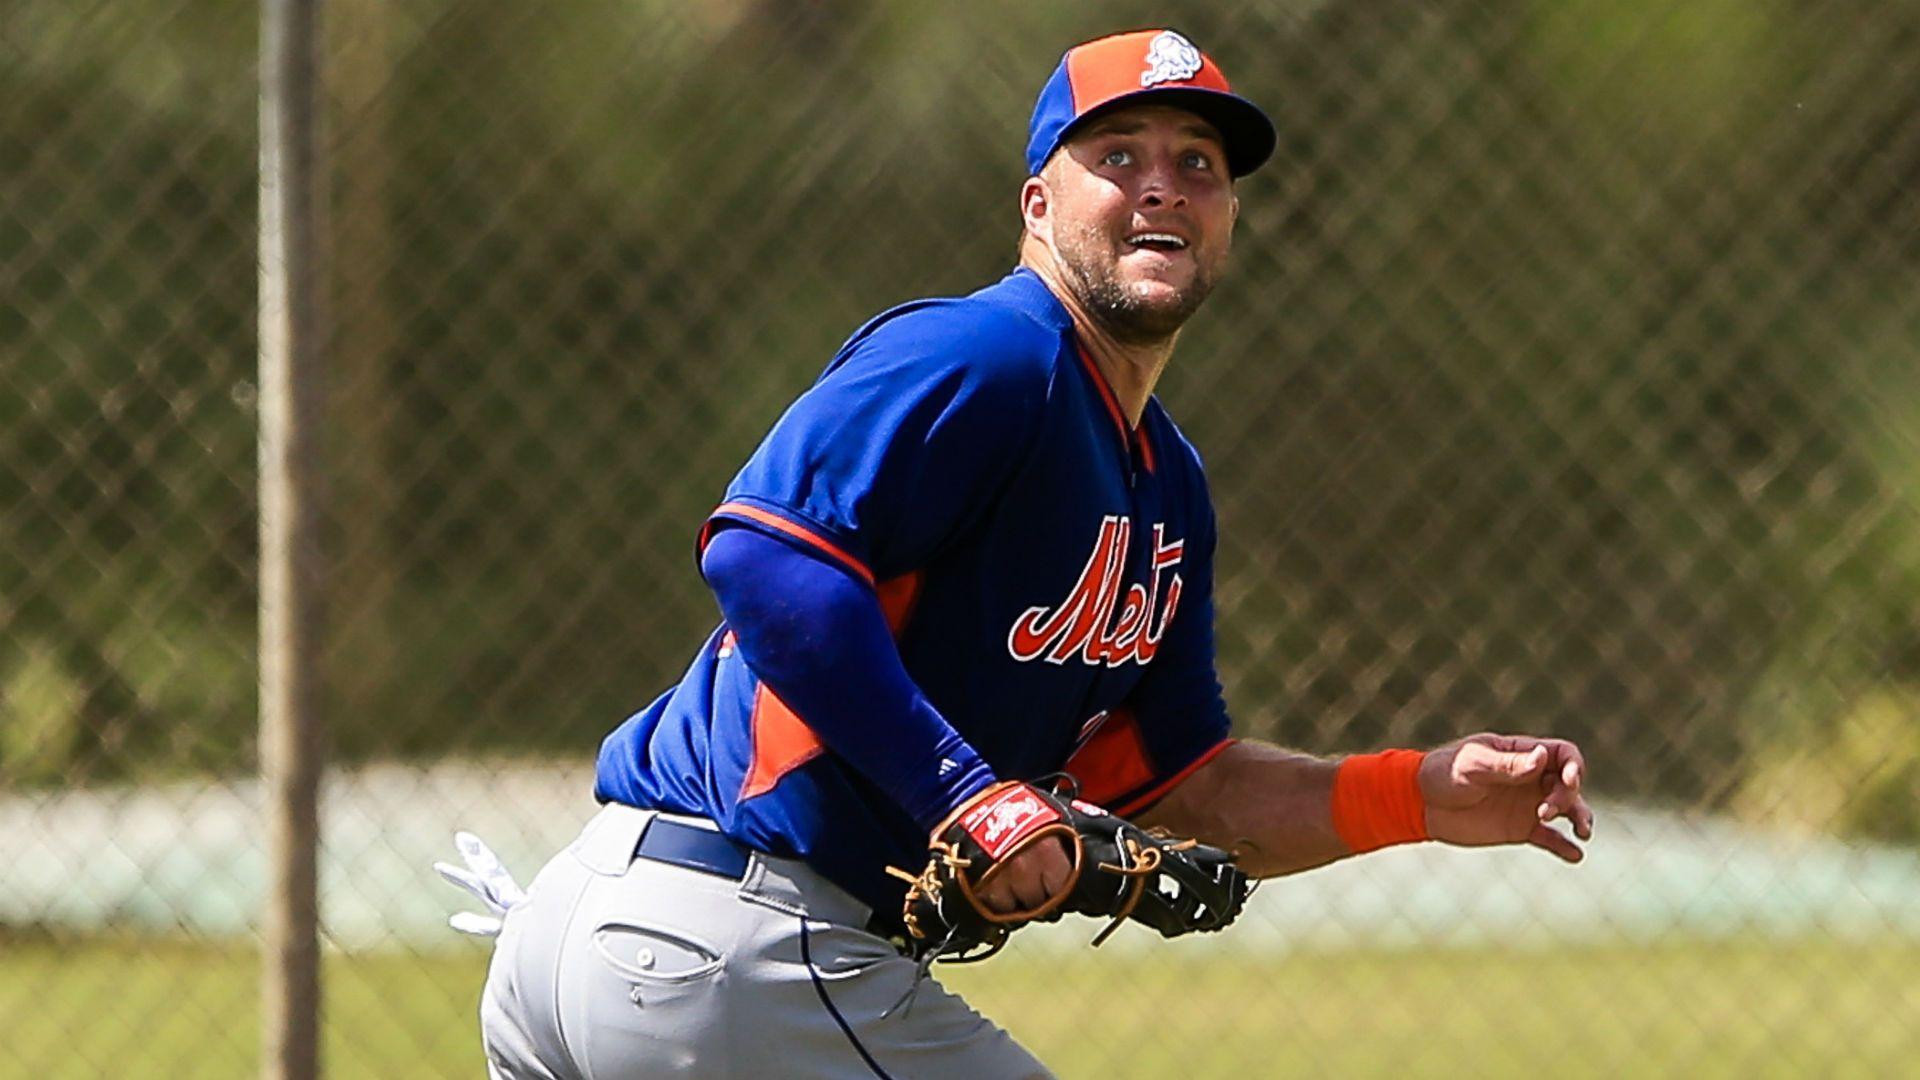 Mets GM on Tim Tebow's spring: 'He'll be around' MLB camp. MLB